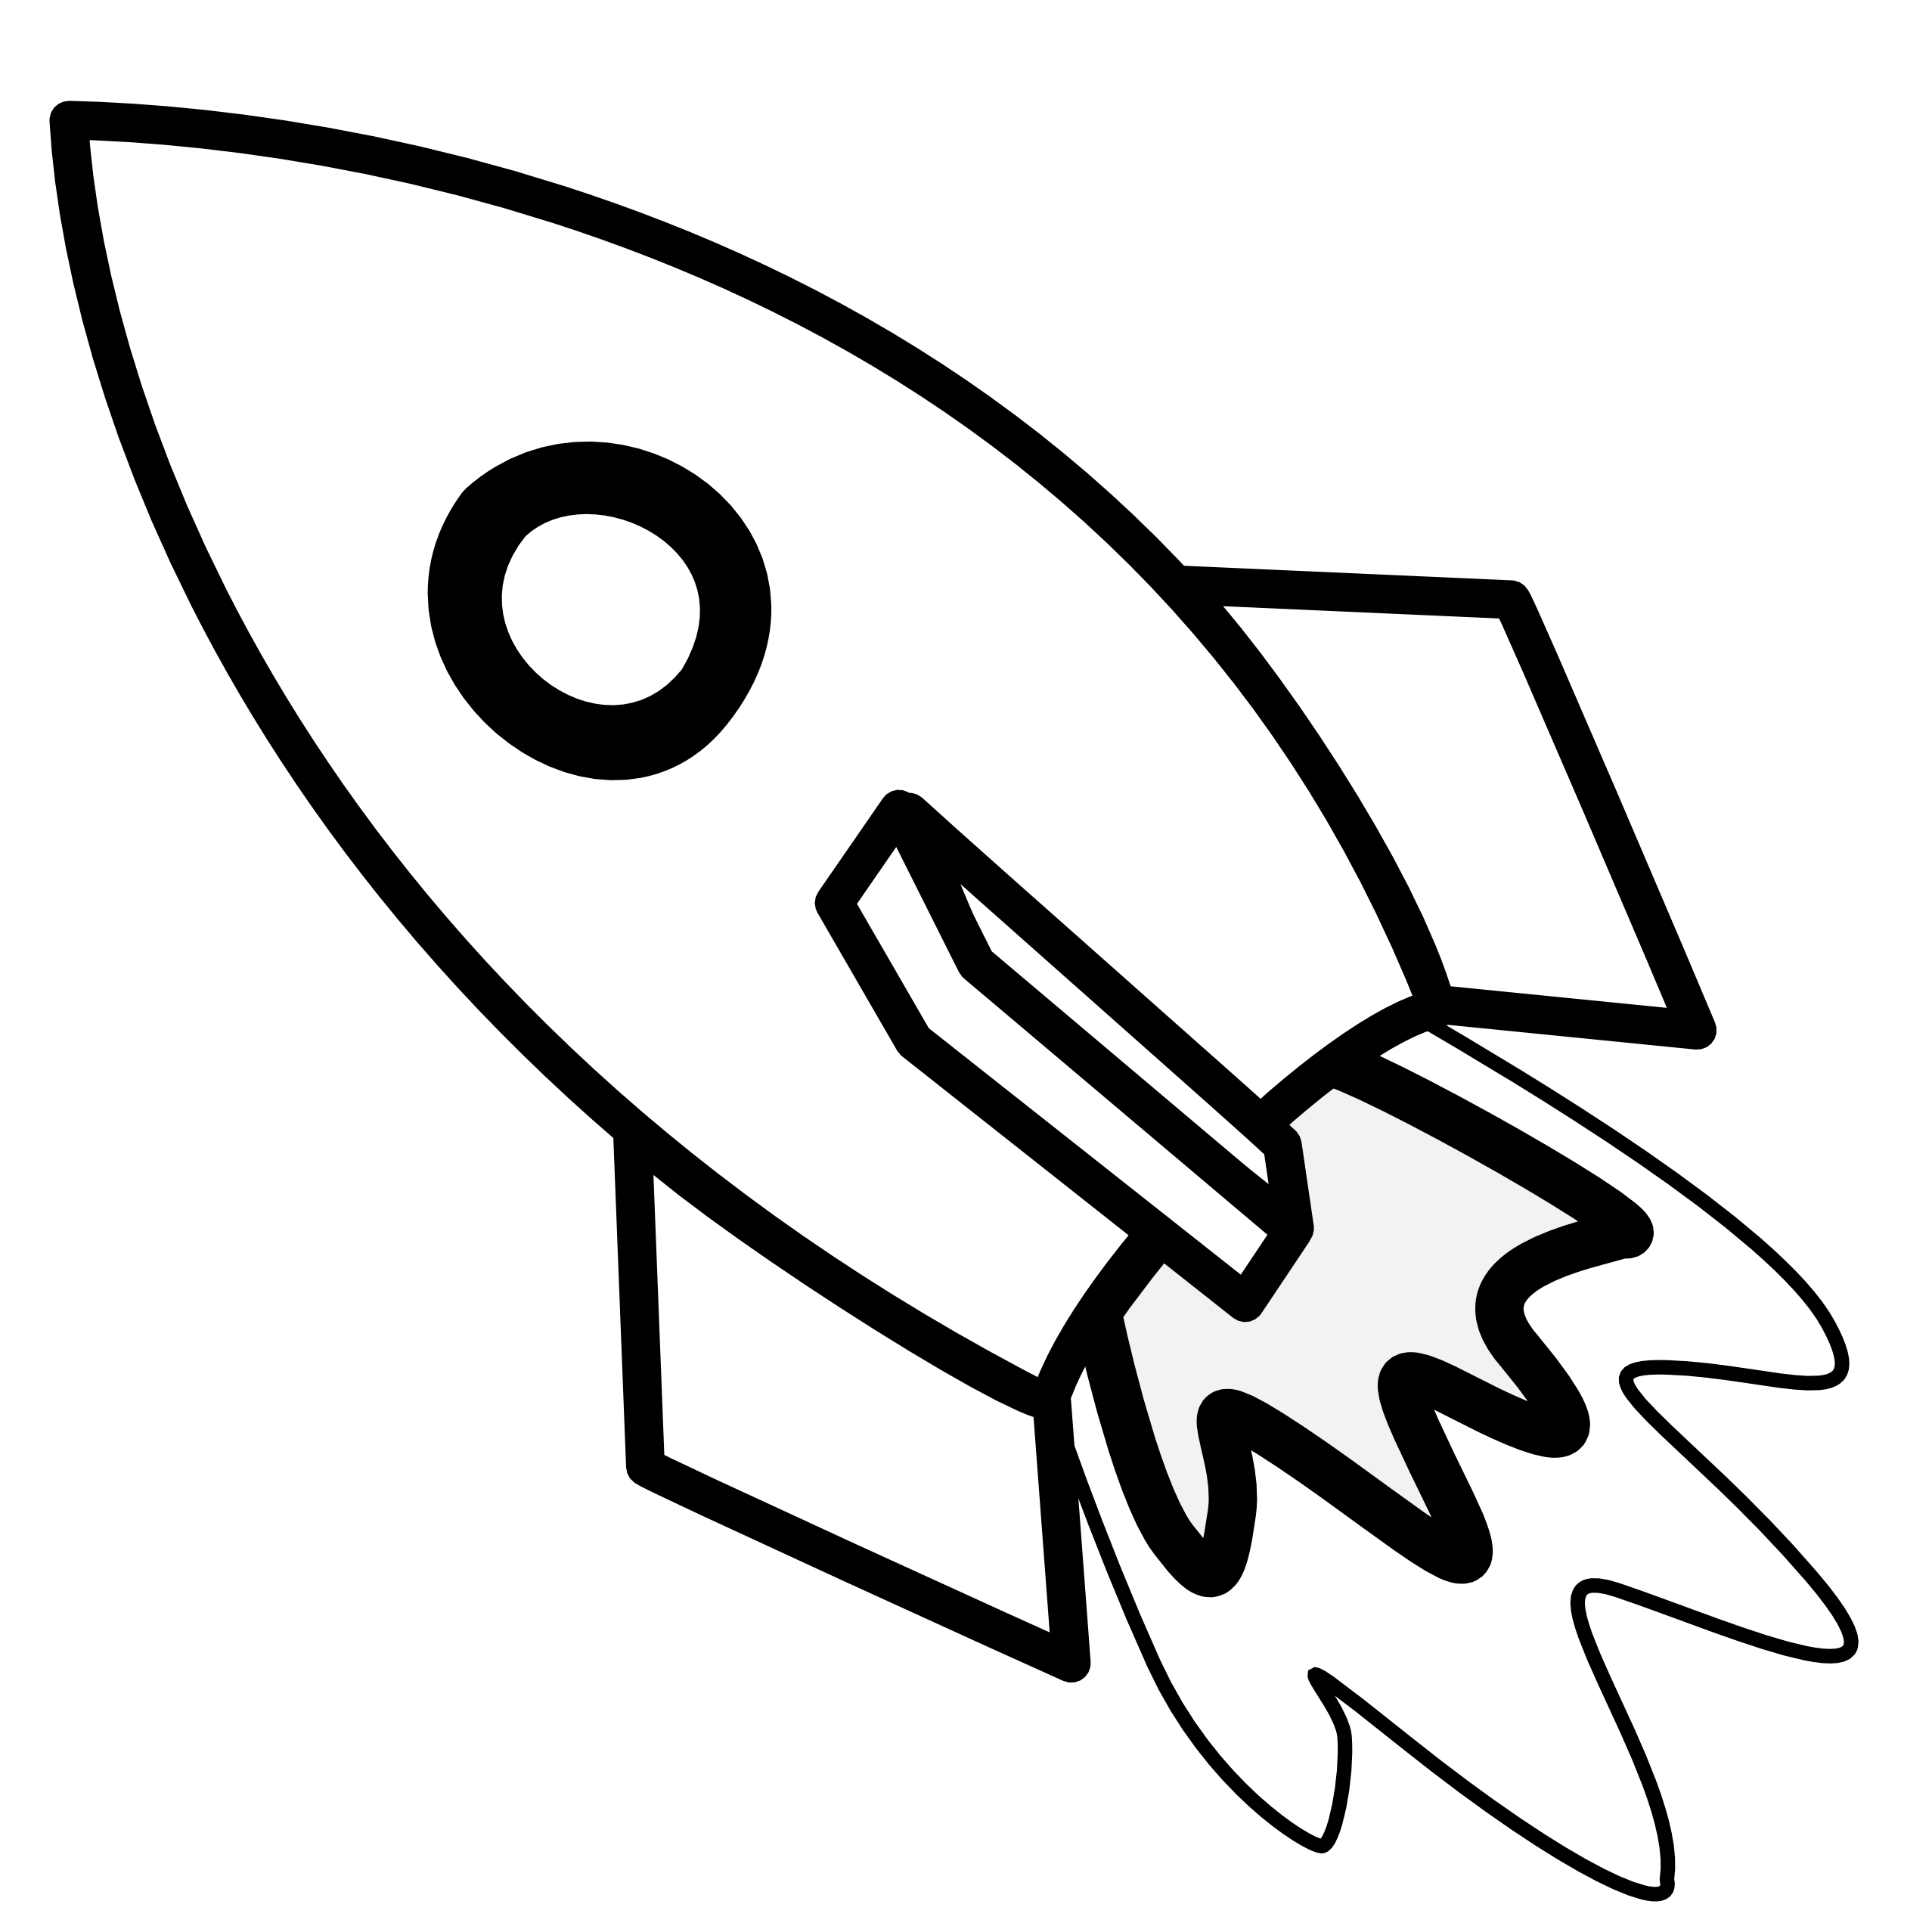 Wagon clipart coloring page. Rocket black and white